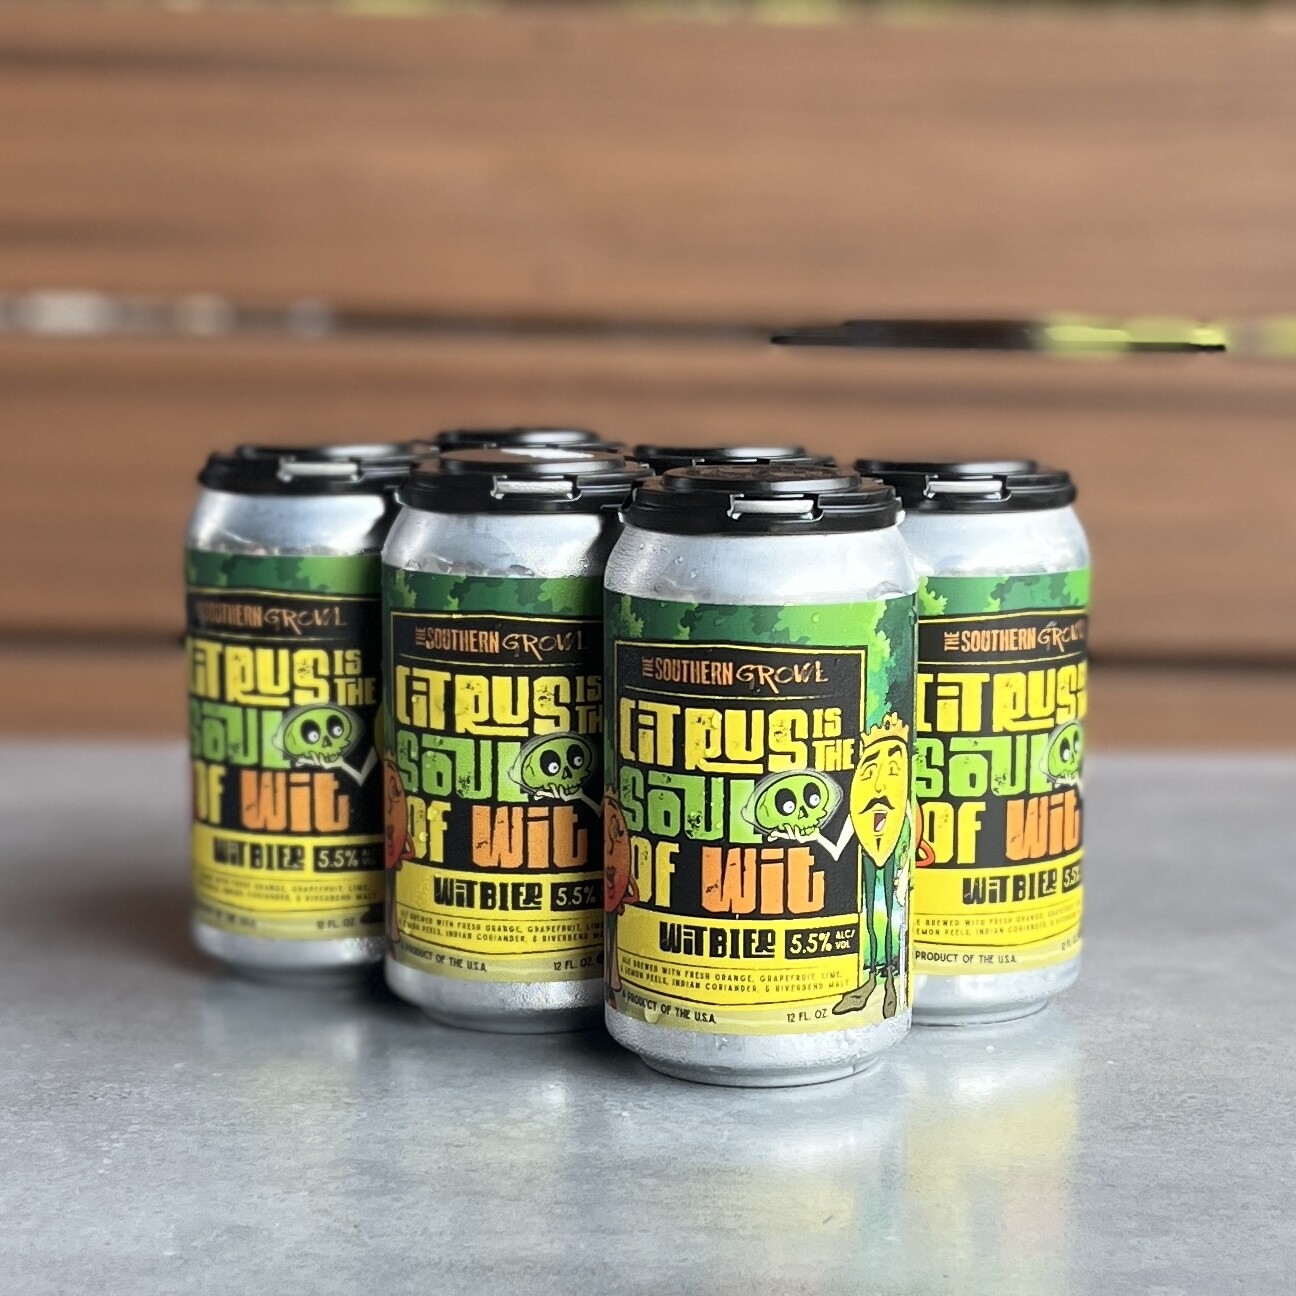 The Southern Growl Citrus Is The Soul Of Wit (6pk)